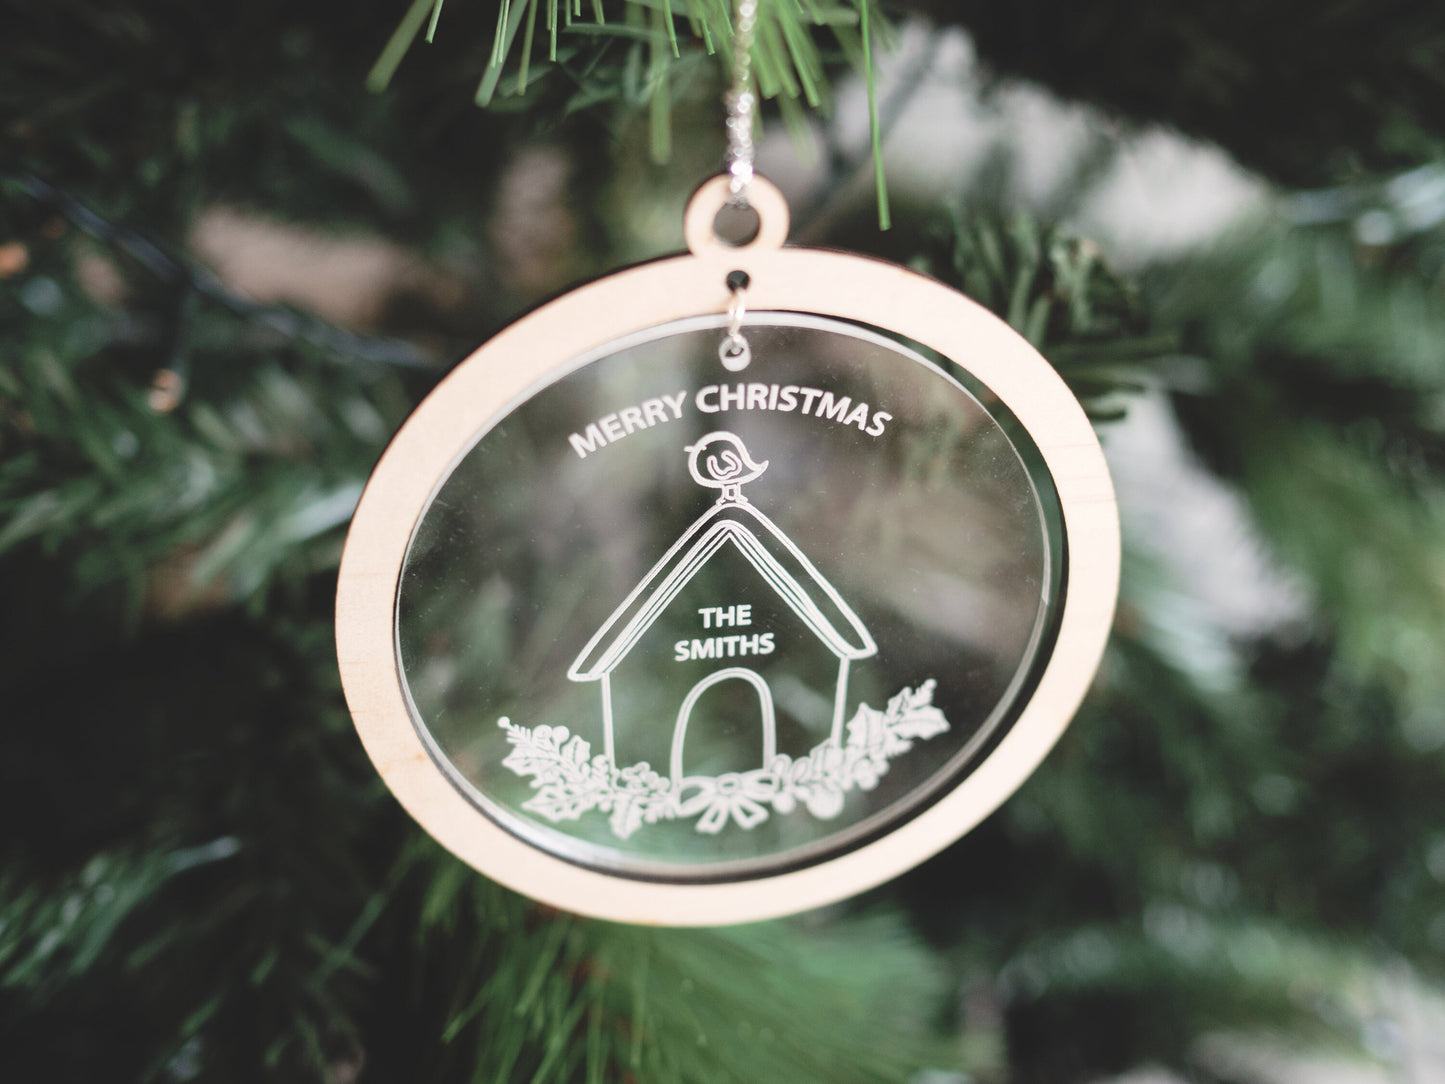 Personalised Family Ornament - Christmas Tree Decoration, House Ornament, Family Christmas Ornament, Christmas Tree Decor, New Home Ornament